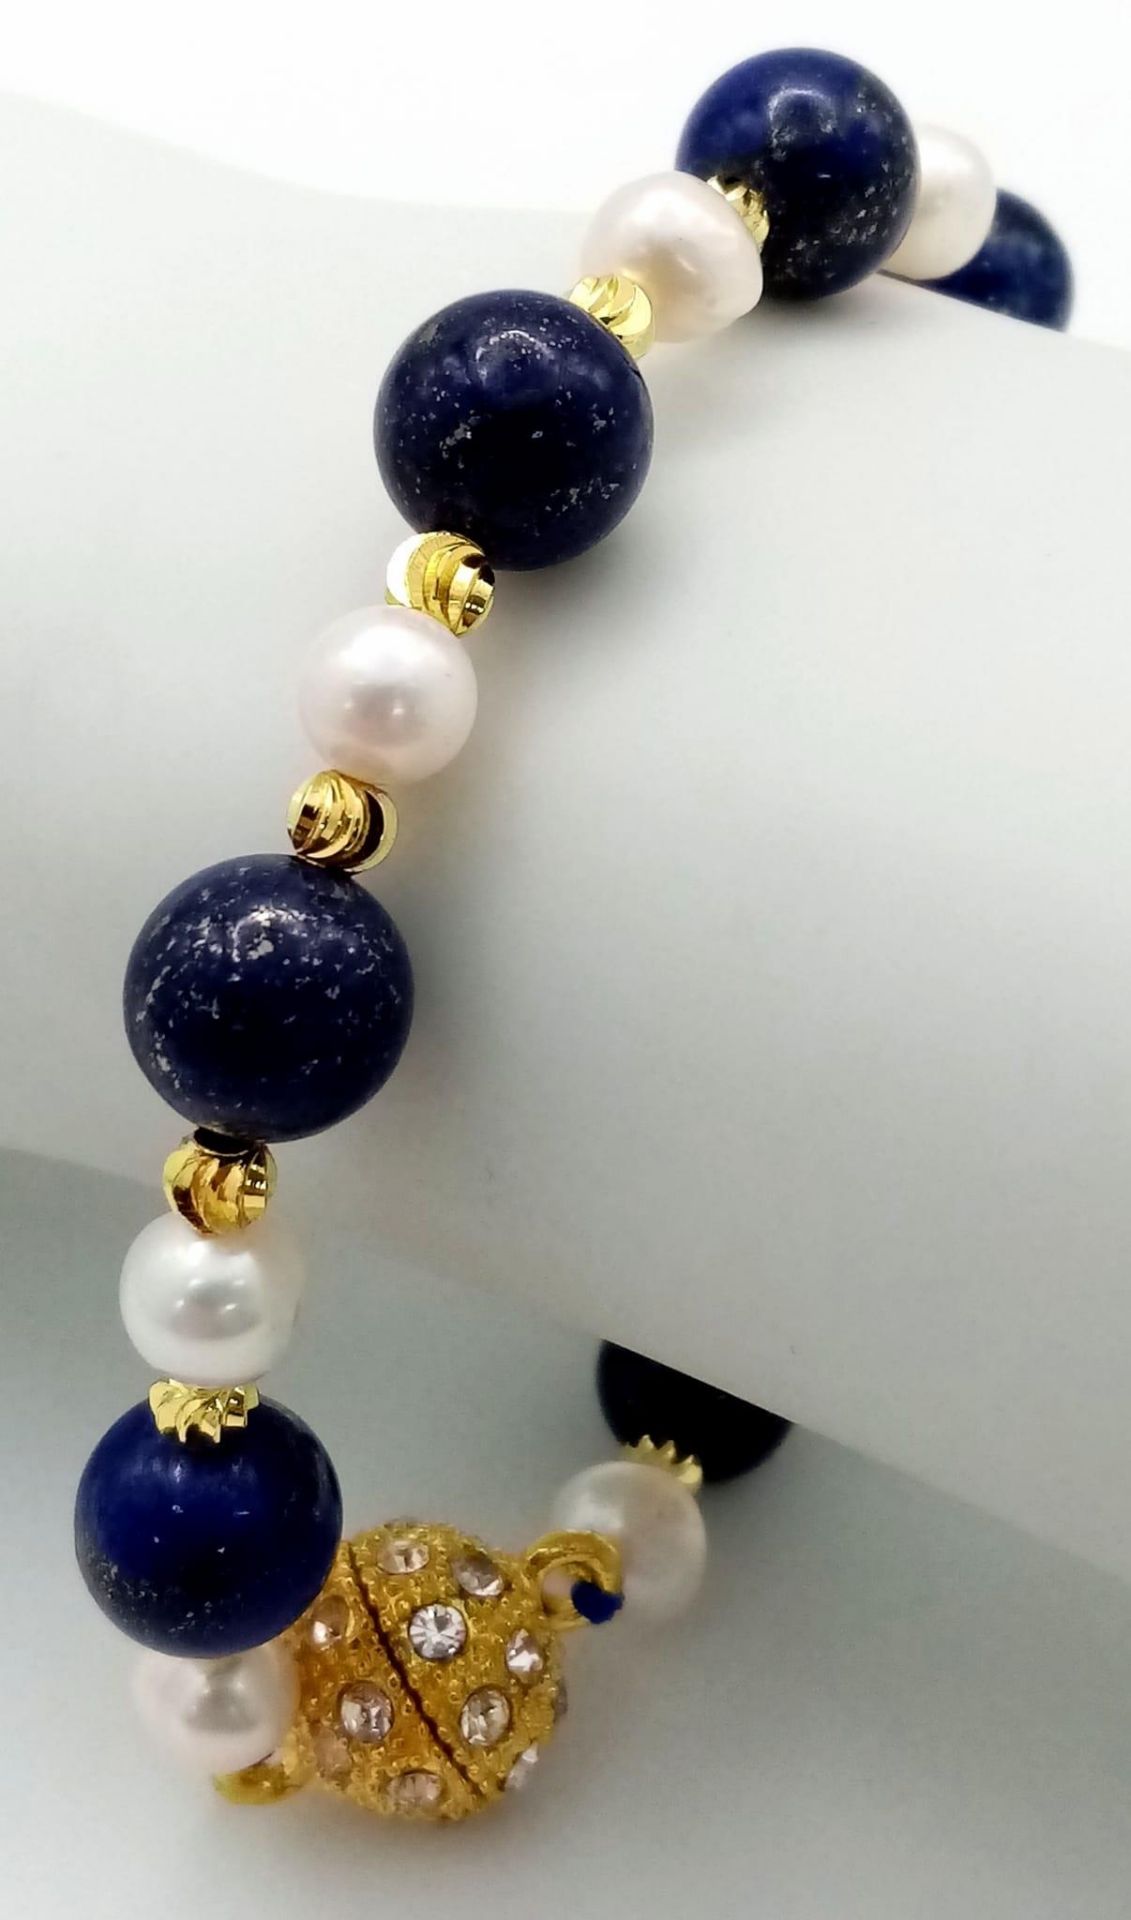 A Lapis Lazuli and Cultured Pearl Bracelet. Gilded spacers and magnetic glitterball clasp.